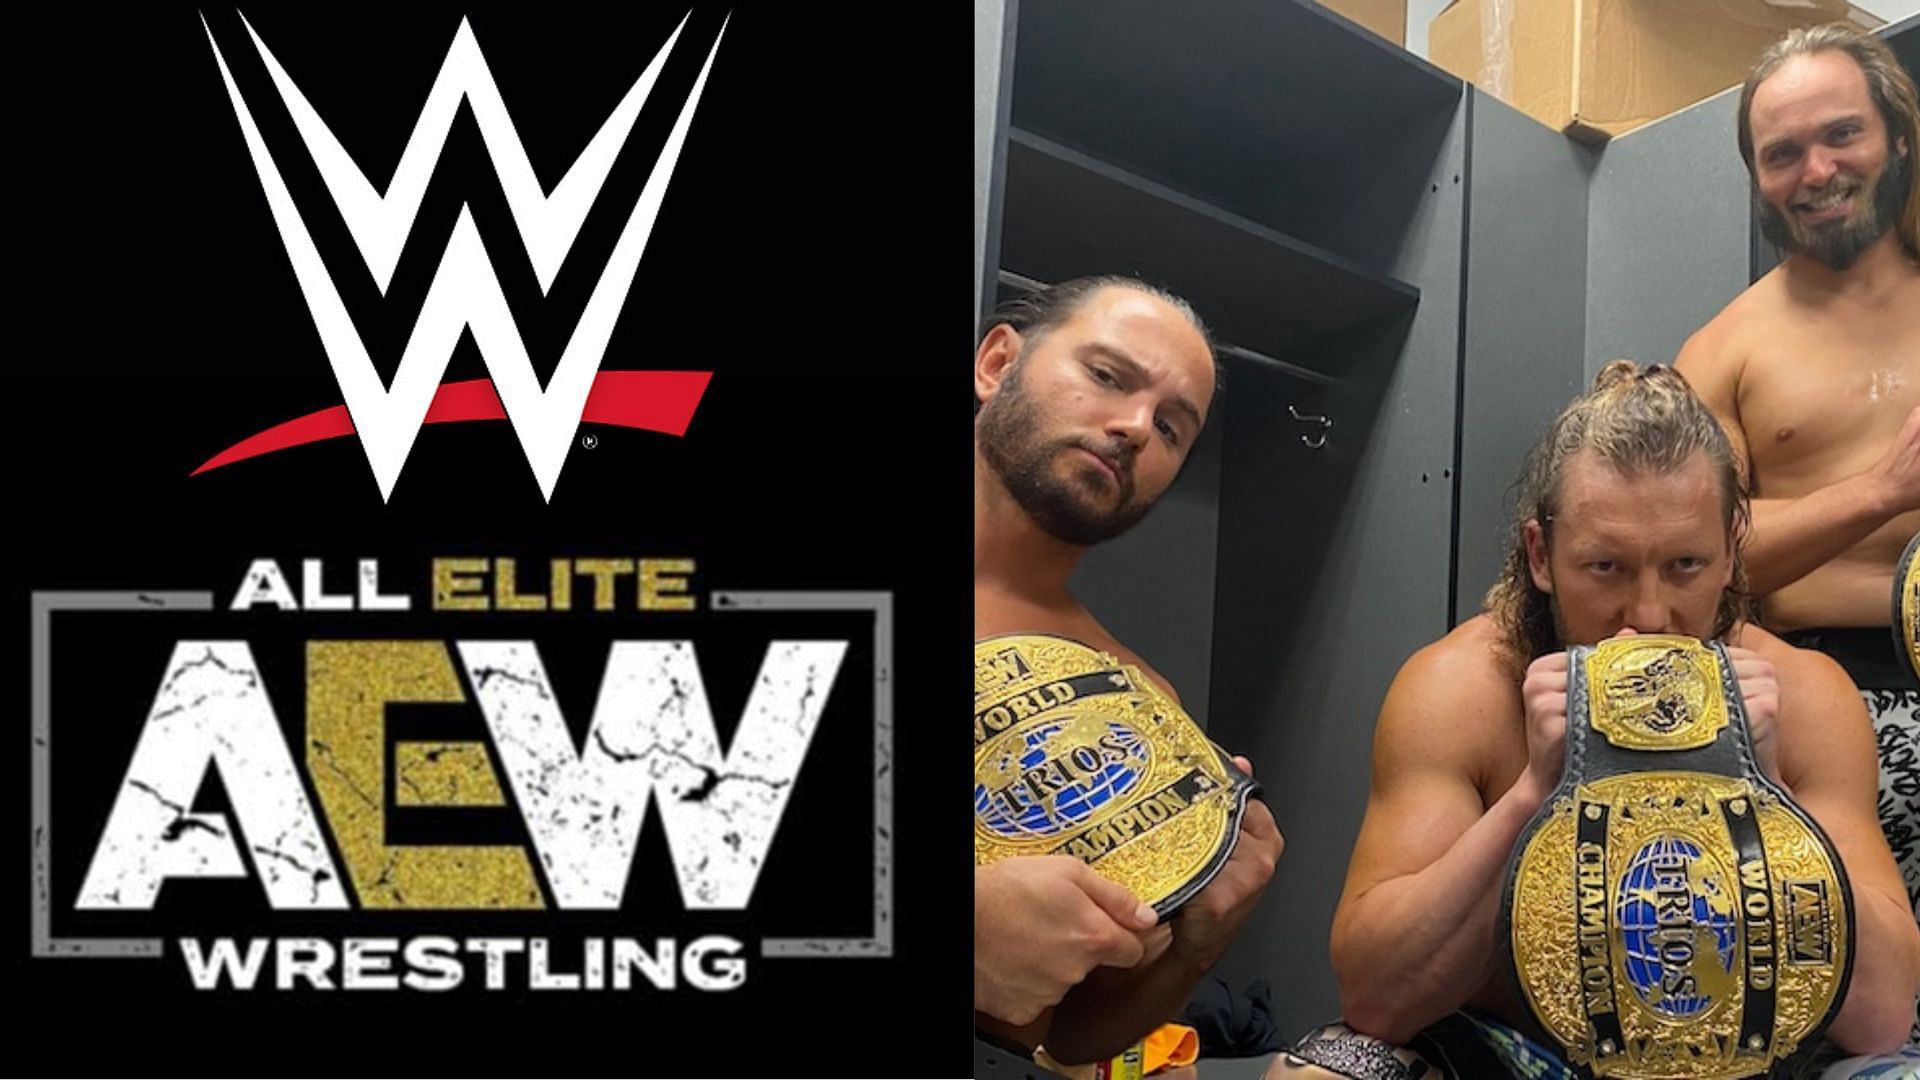 The Young Bucks and Kenny Omega were forced to vacate the AEW World Trios Championship